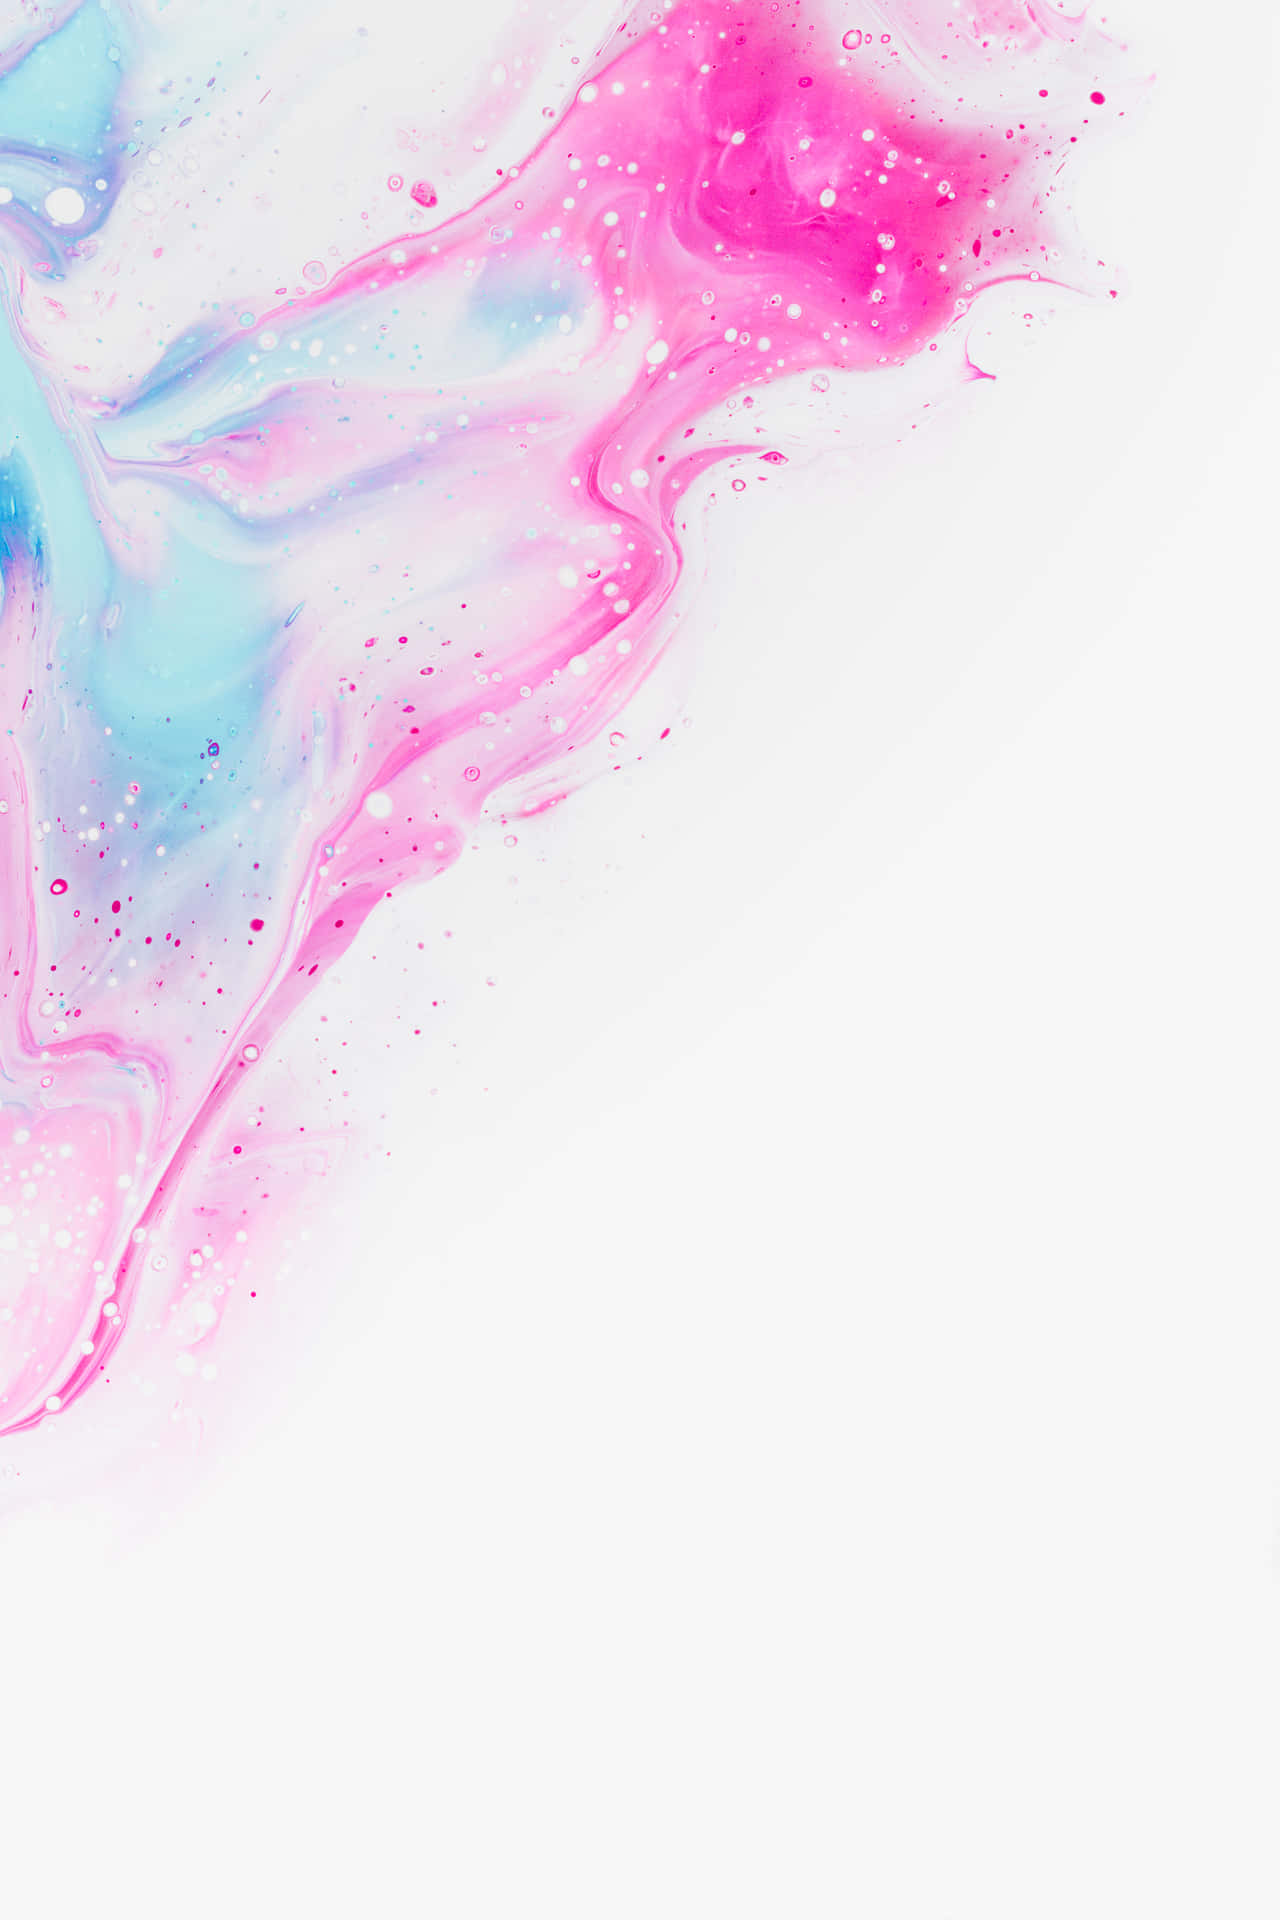 A Blue And Pink Liquid On A White Background